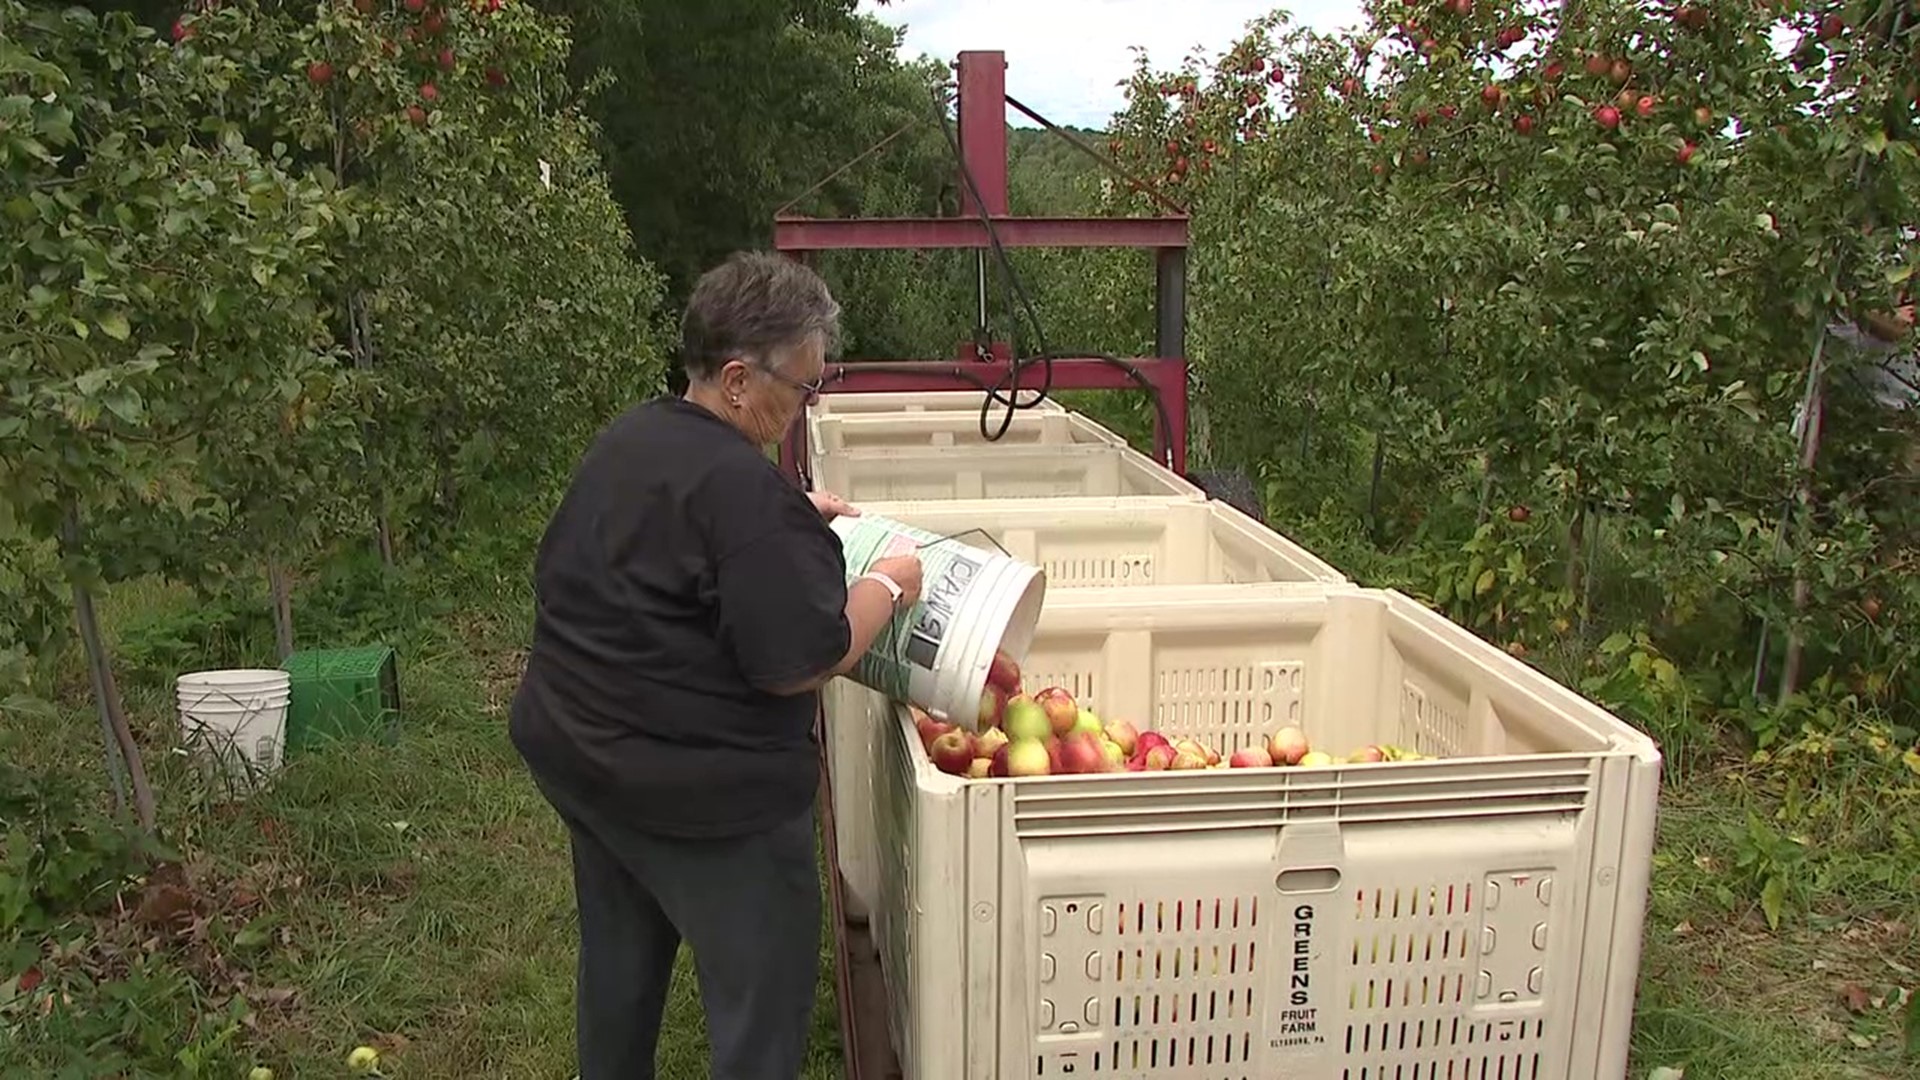 With help from the community, a fruit farm is recovering from a hailstorm and giving back to others.